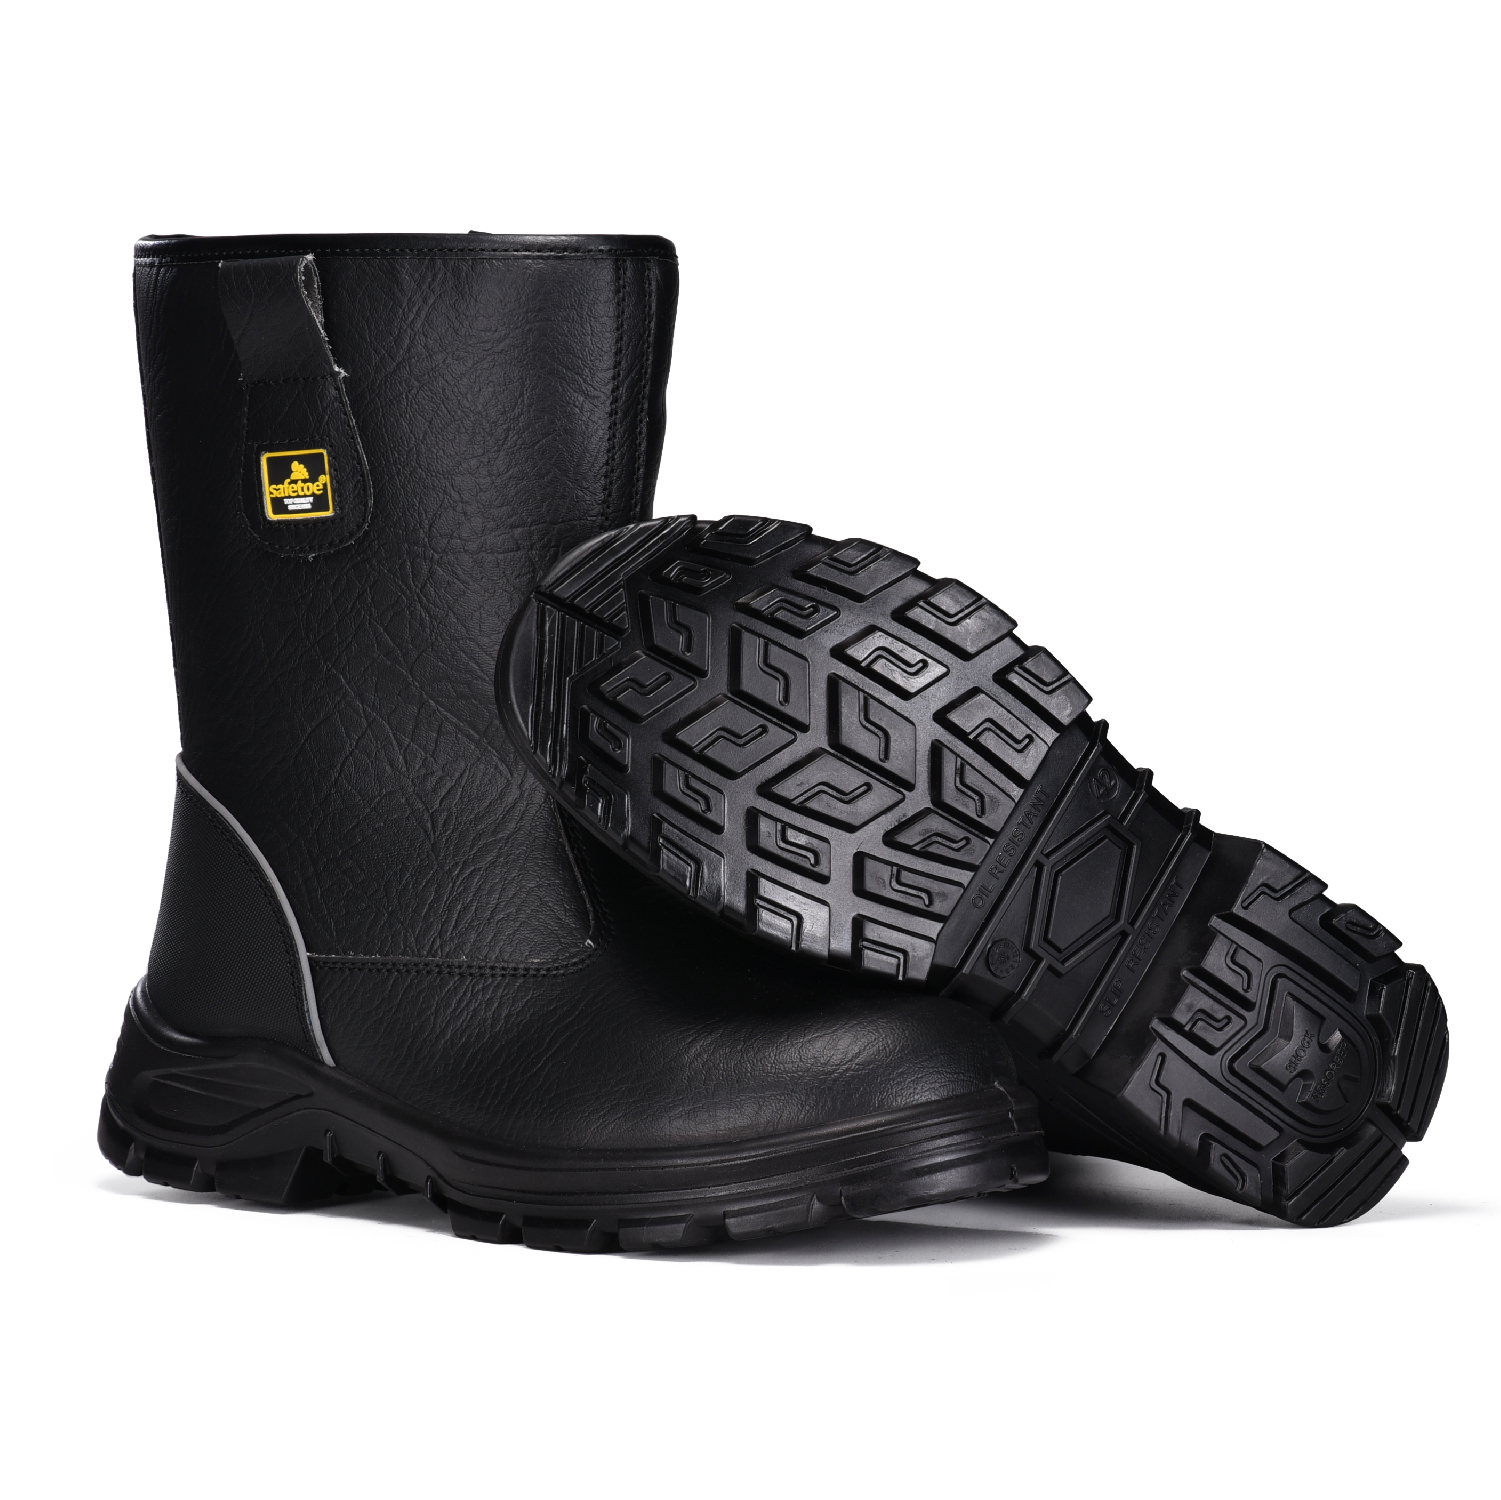 Men's Steel Toe Industrial & Construction Boots for Site Work H-9430 Black